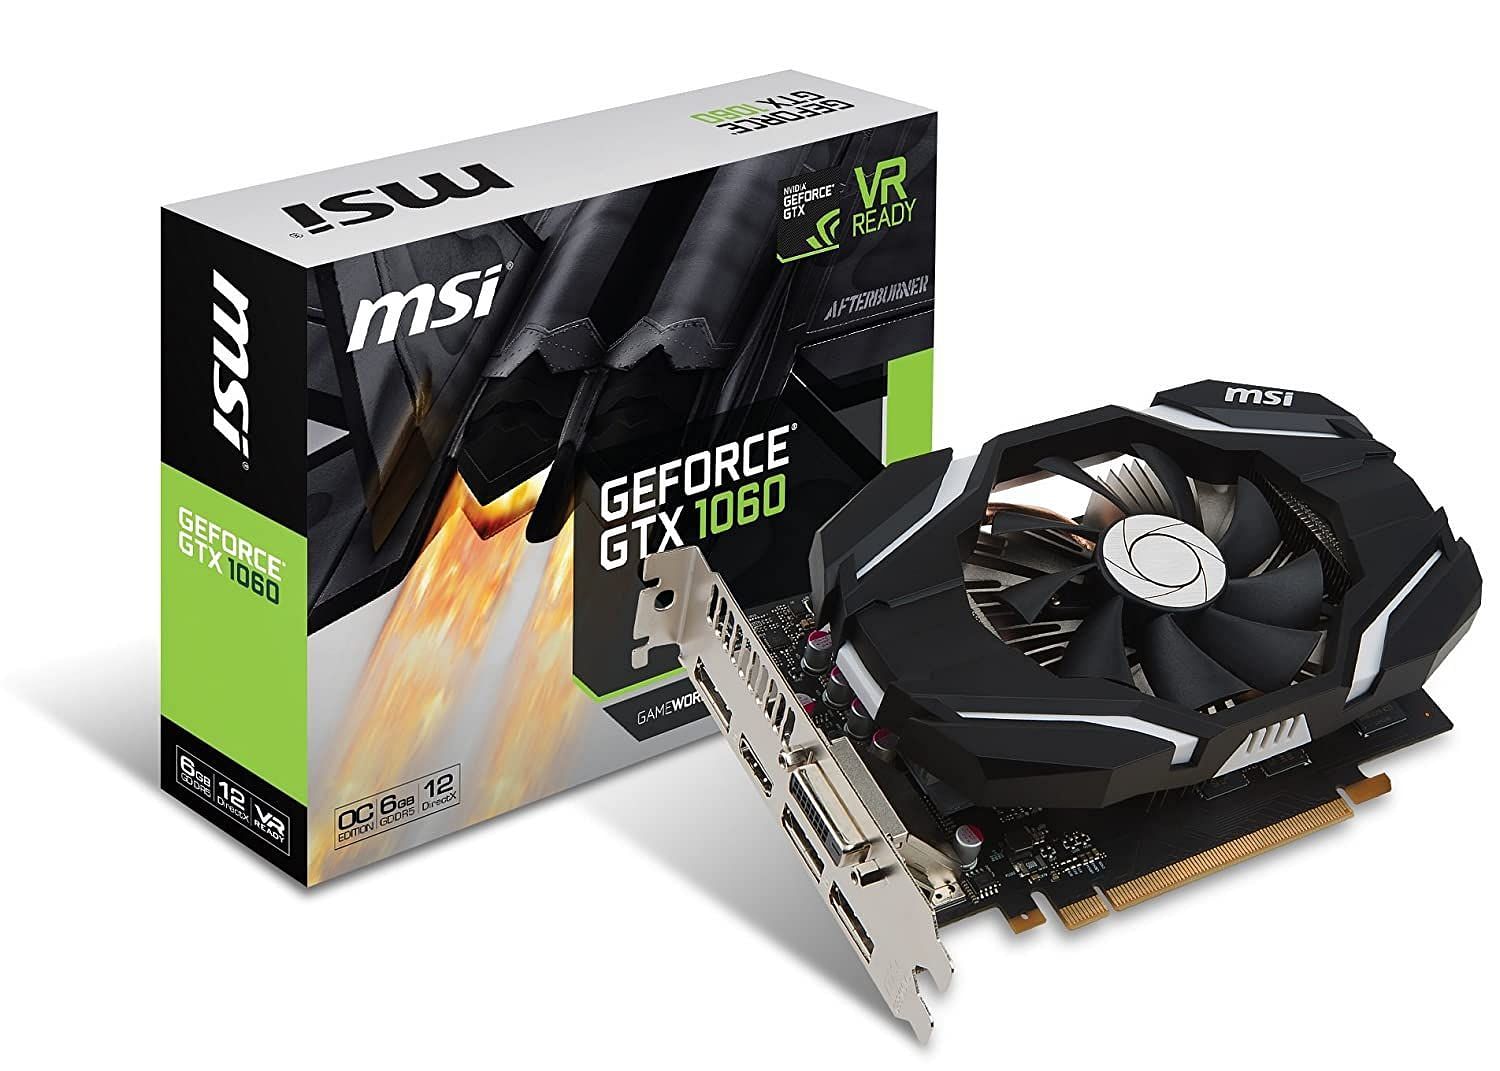 Nvidia GTX 1060 loses its crown as the most popular GPU Steam Survey, GTX 1650 claims the title